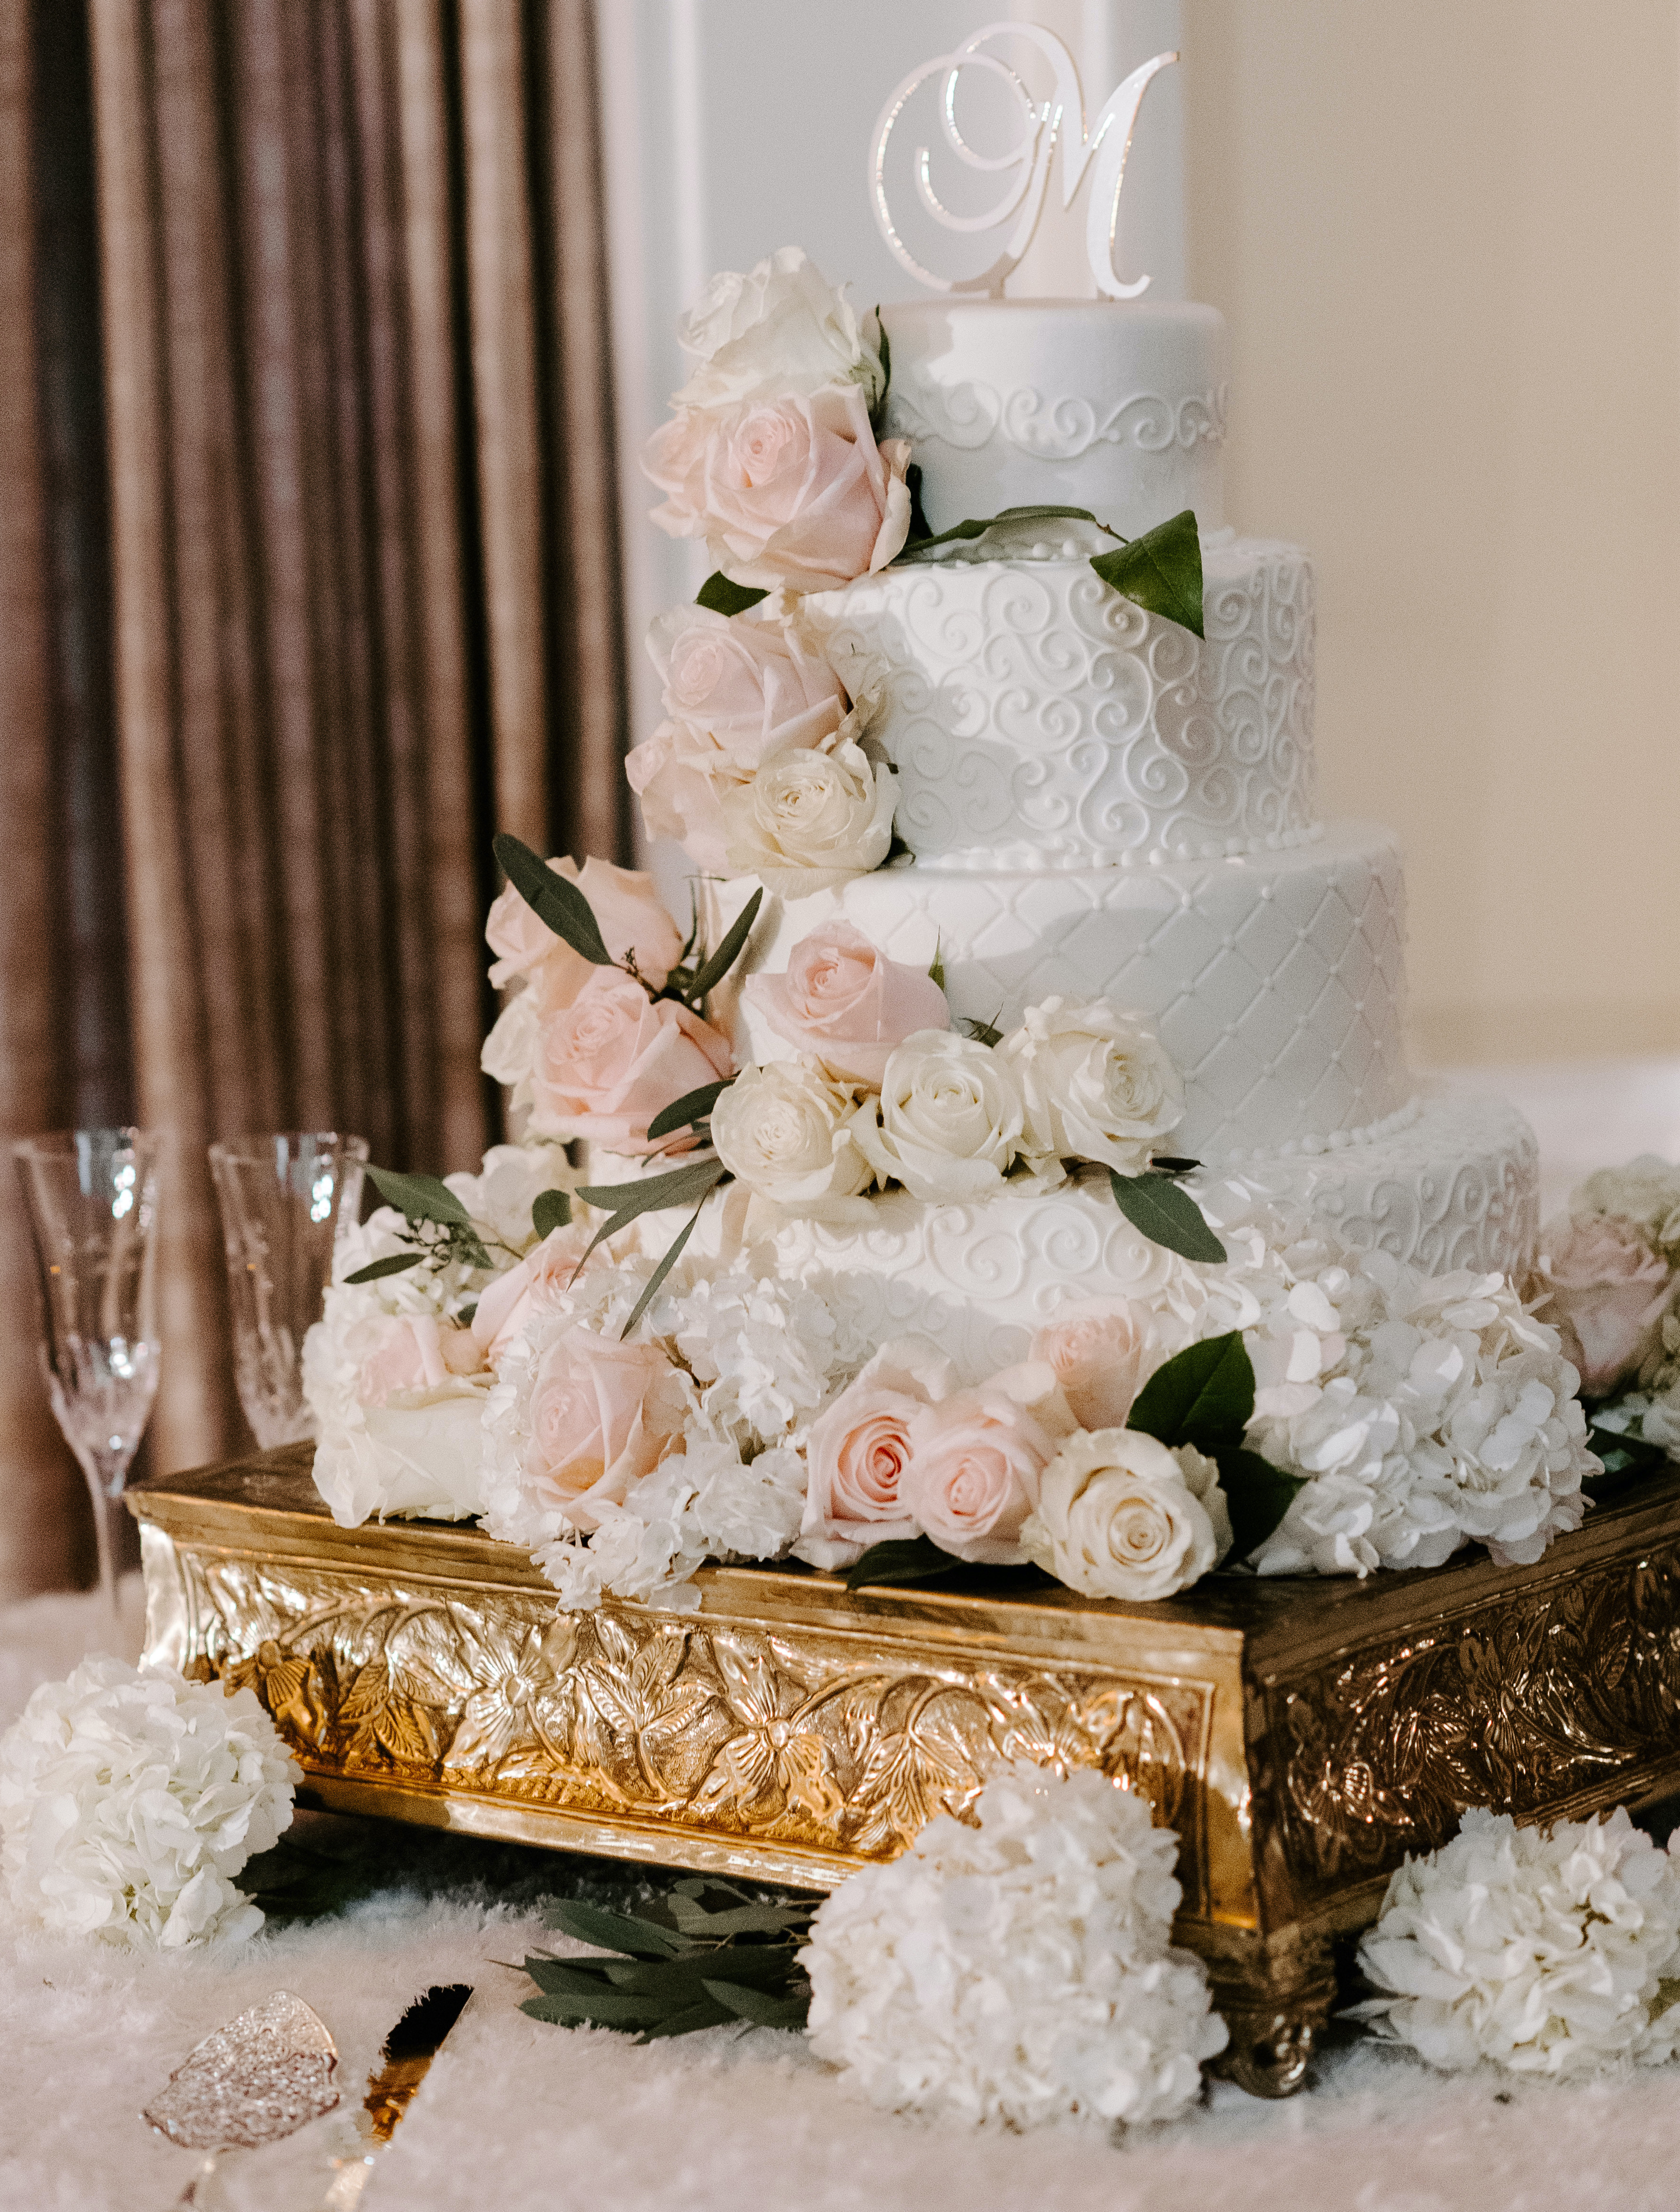 The white wedding cake with blush and ivory roses decorated on it.